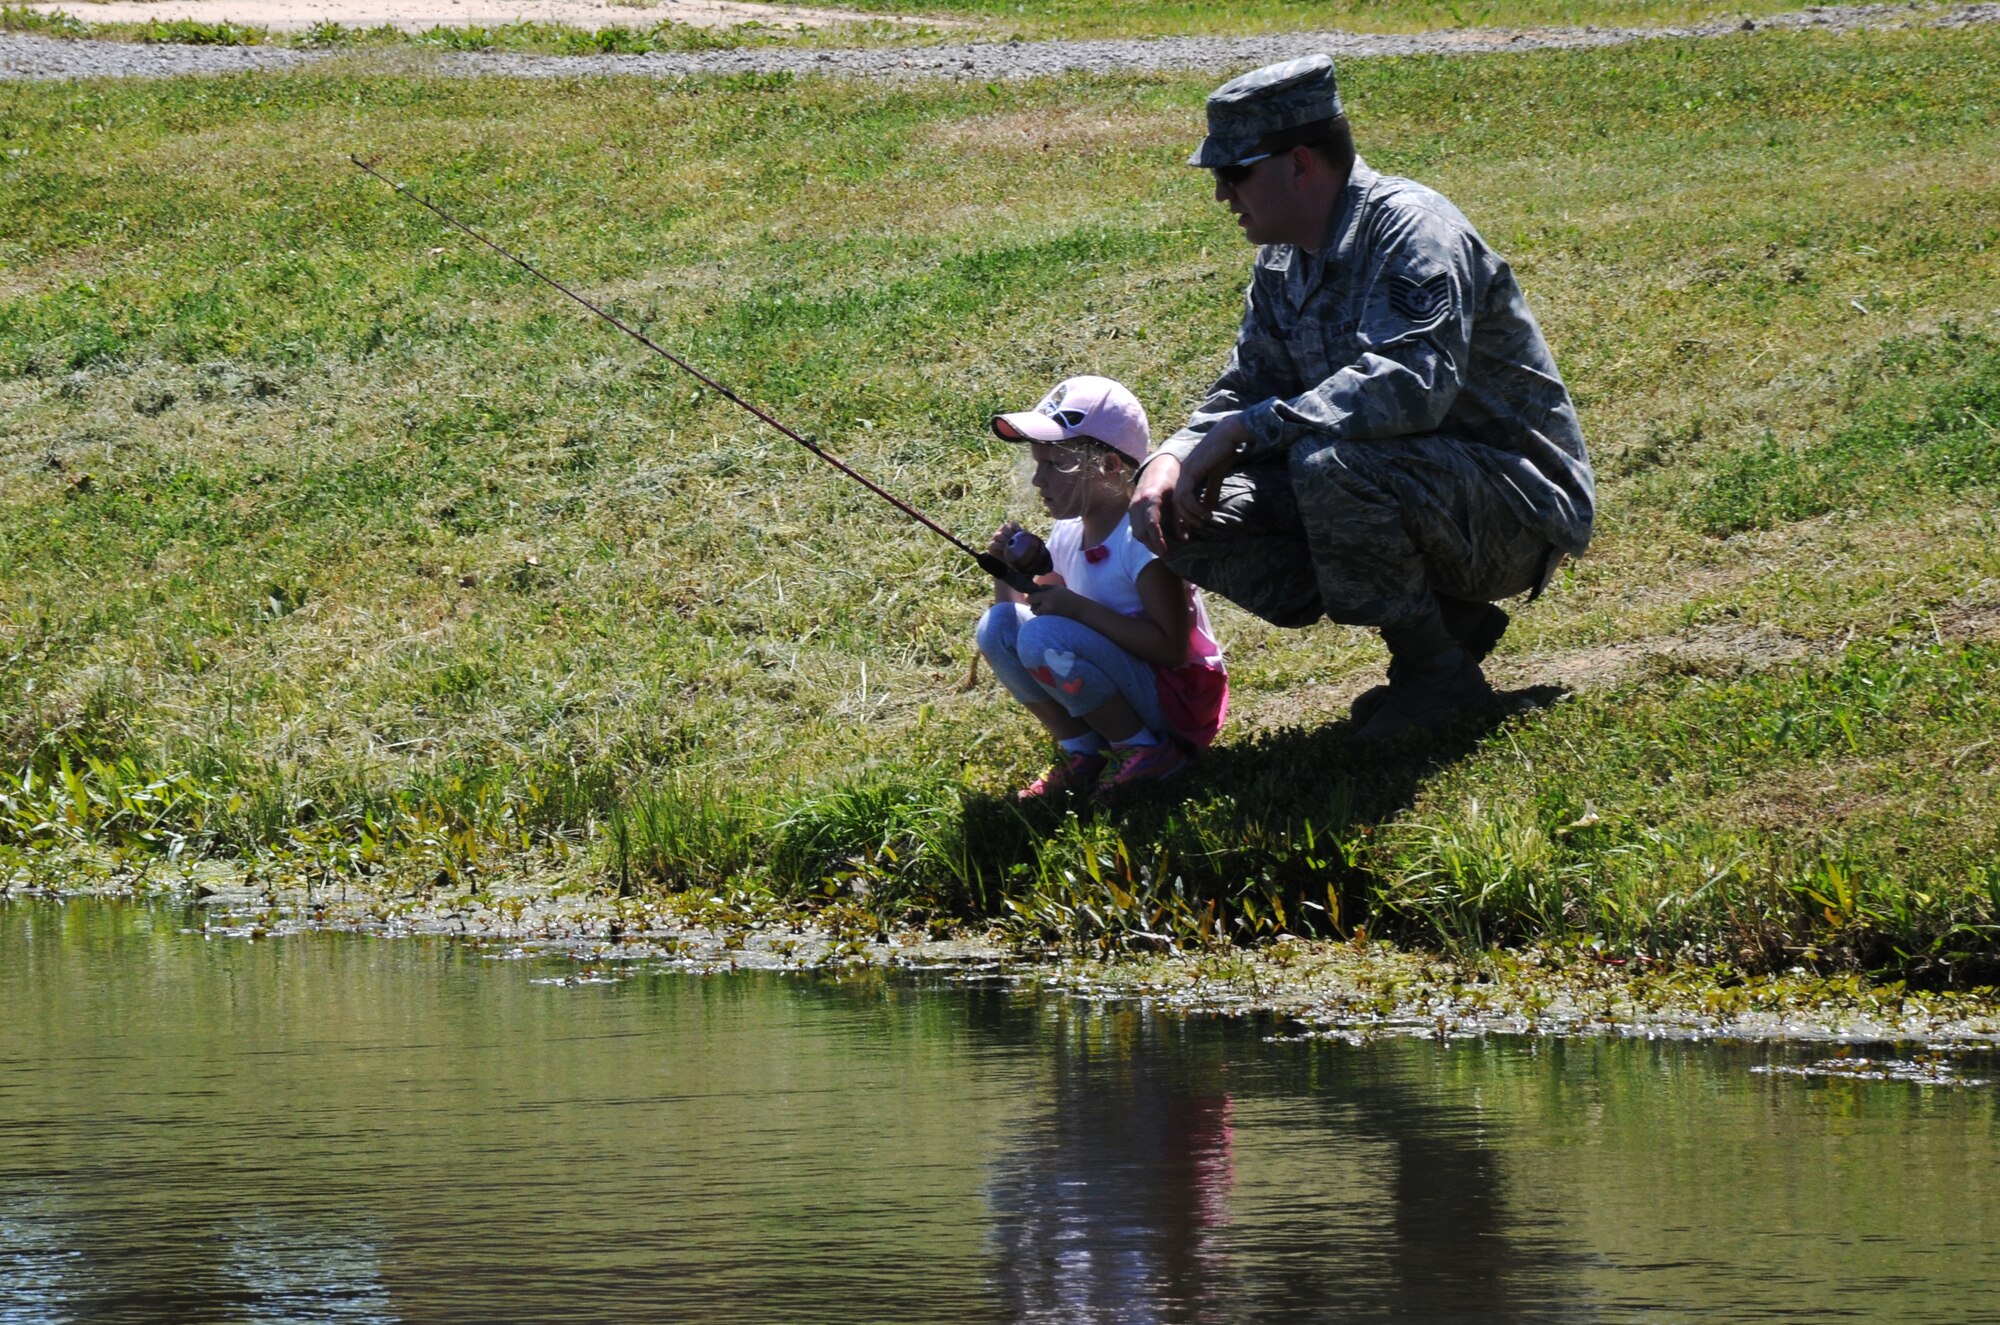 Airmen with the 188th Fighter Wing along their family members participated in the inaugural youth fishing derby following the wing’s 2nd annual Hawg Jawg 5K at Ebbing Air National Guard Base, Fort Smith, Arkansas, May 3, 2014. (U.S. Air National Guard photo by Airman First Class Cody Martin/Released)